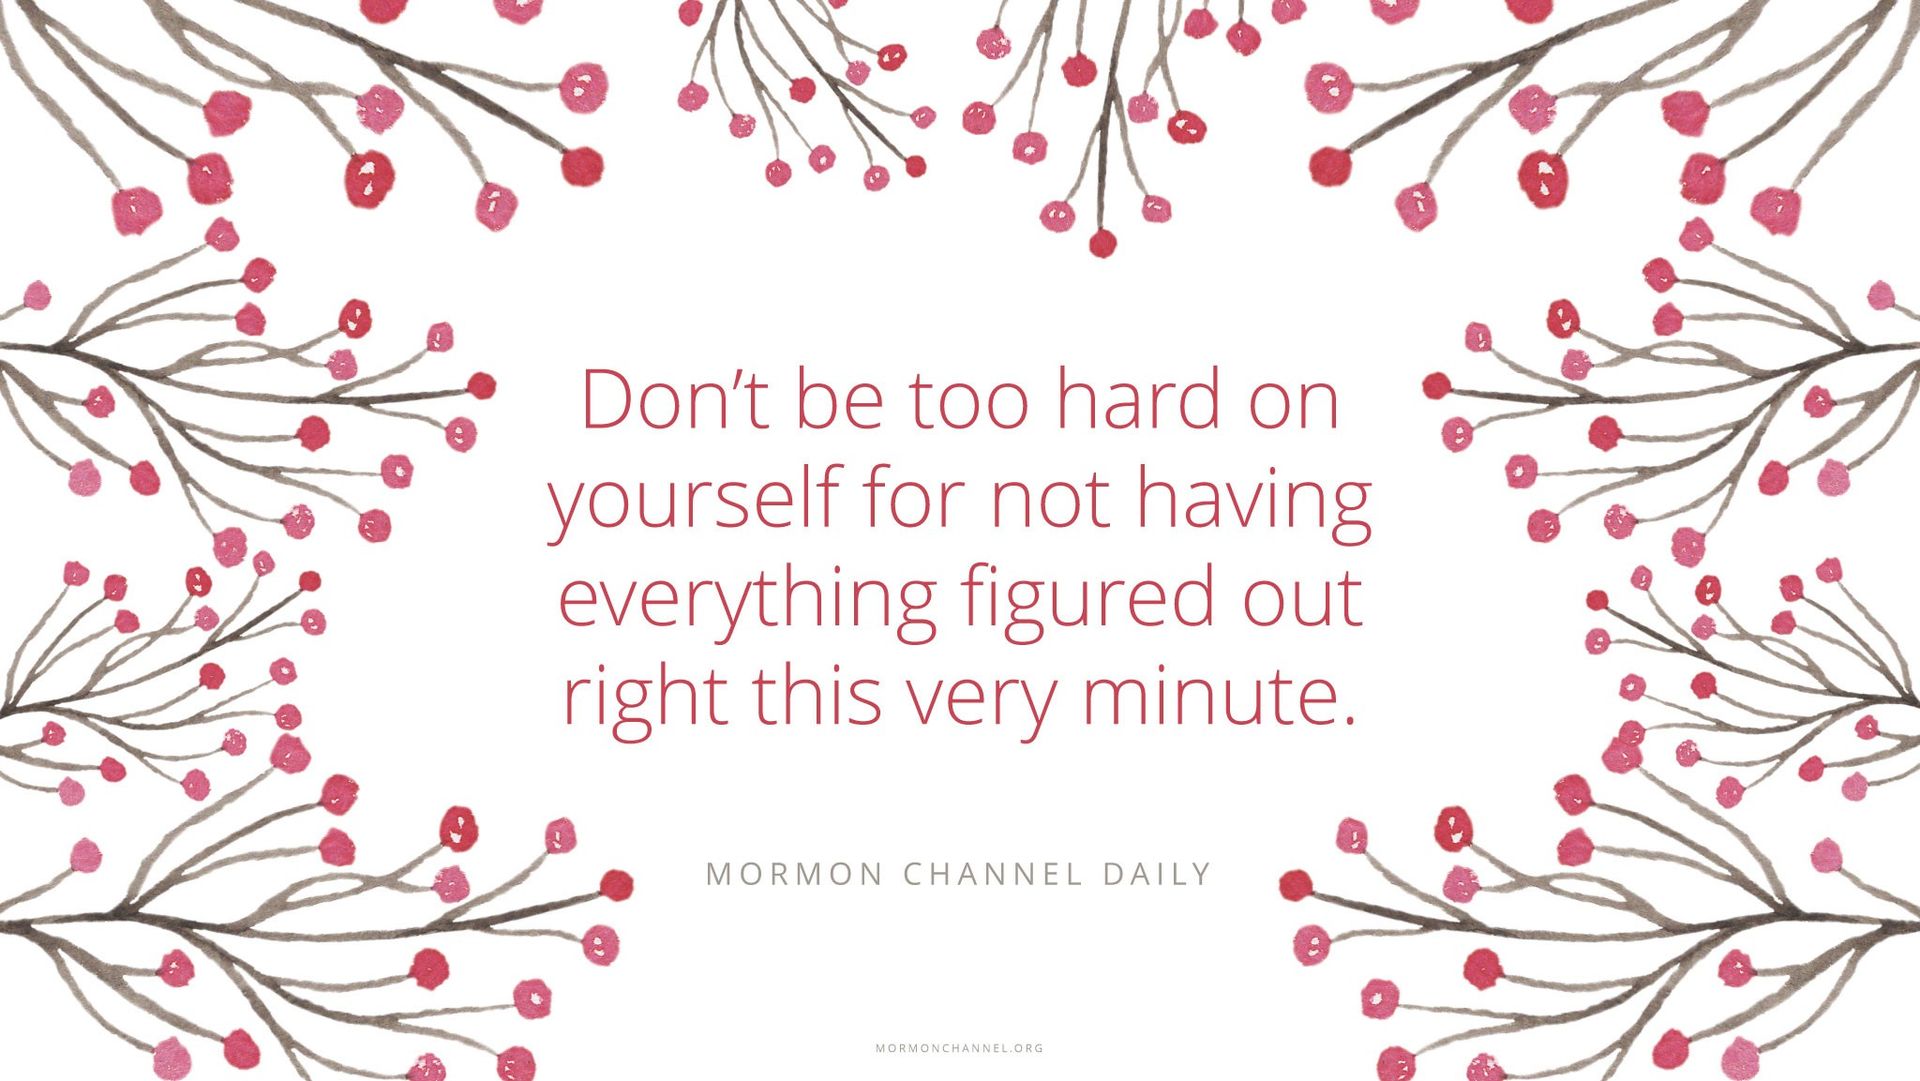 “Don’t be too hard on yourself for not having everything figured out right this very minute.”—Mormon Channel Daily